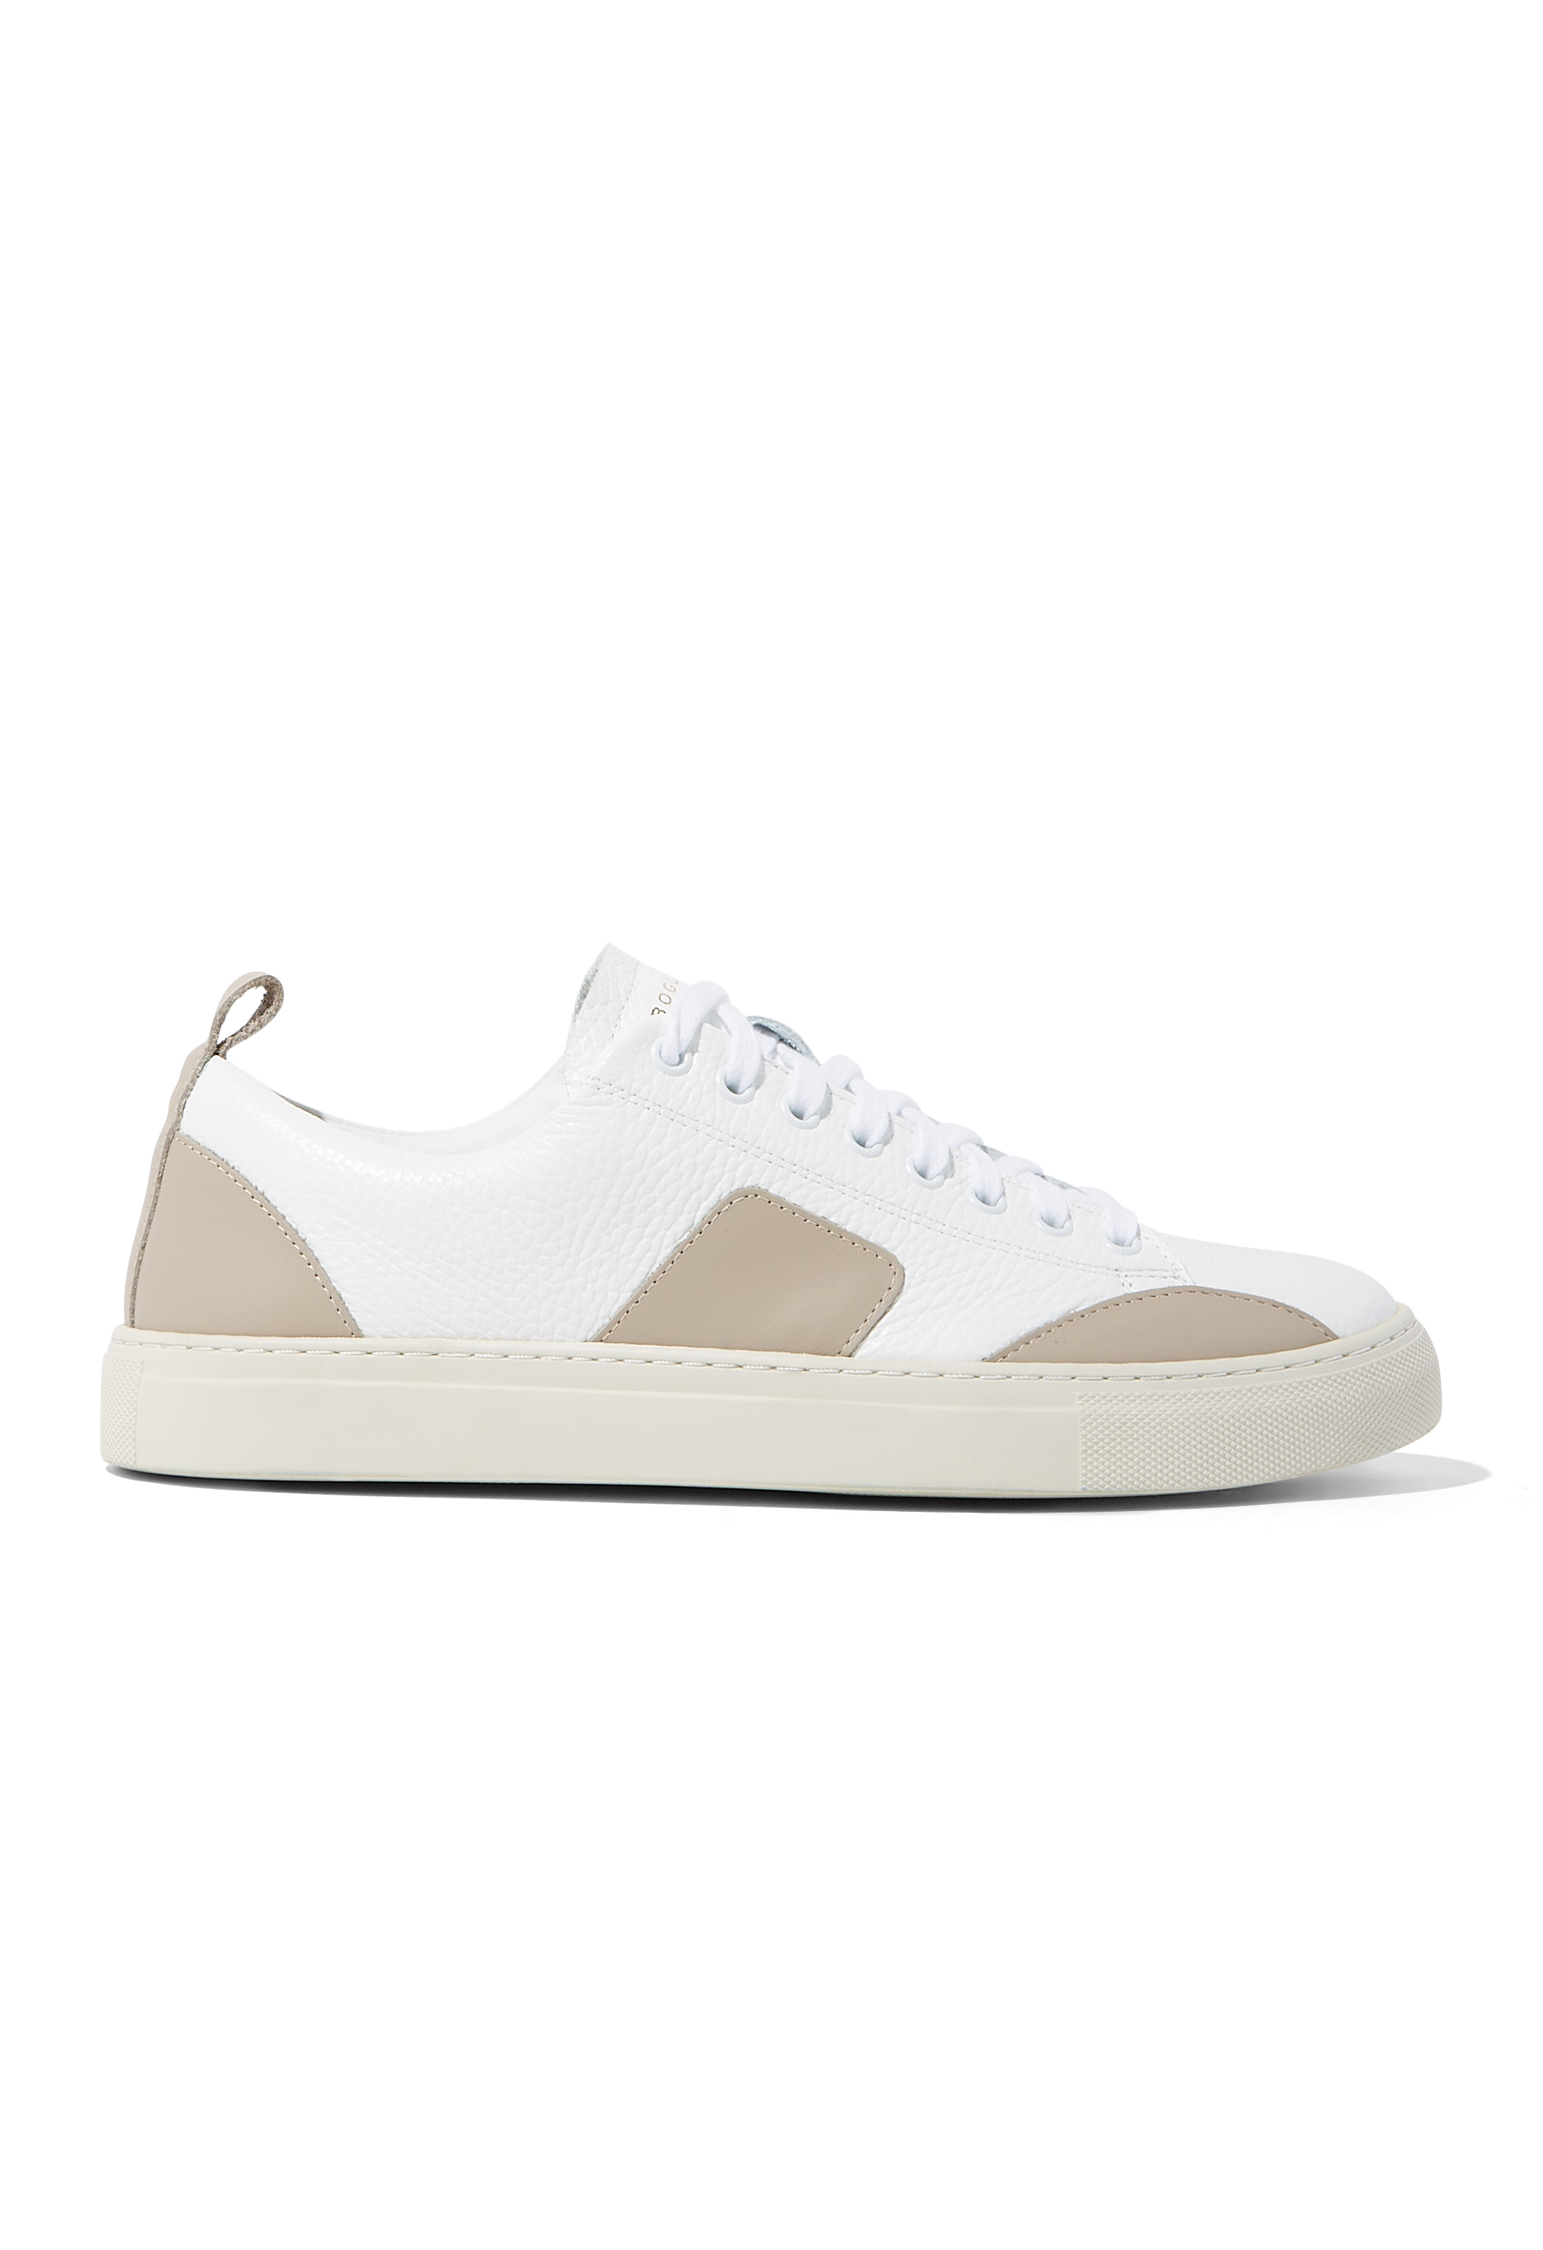 Boglioli White And Beige 100% Leather Sneakers In White And Beige Color